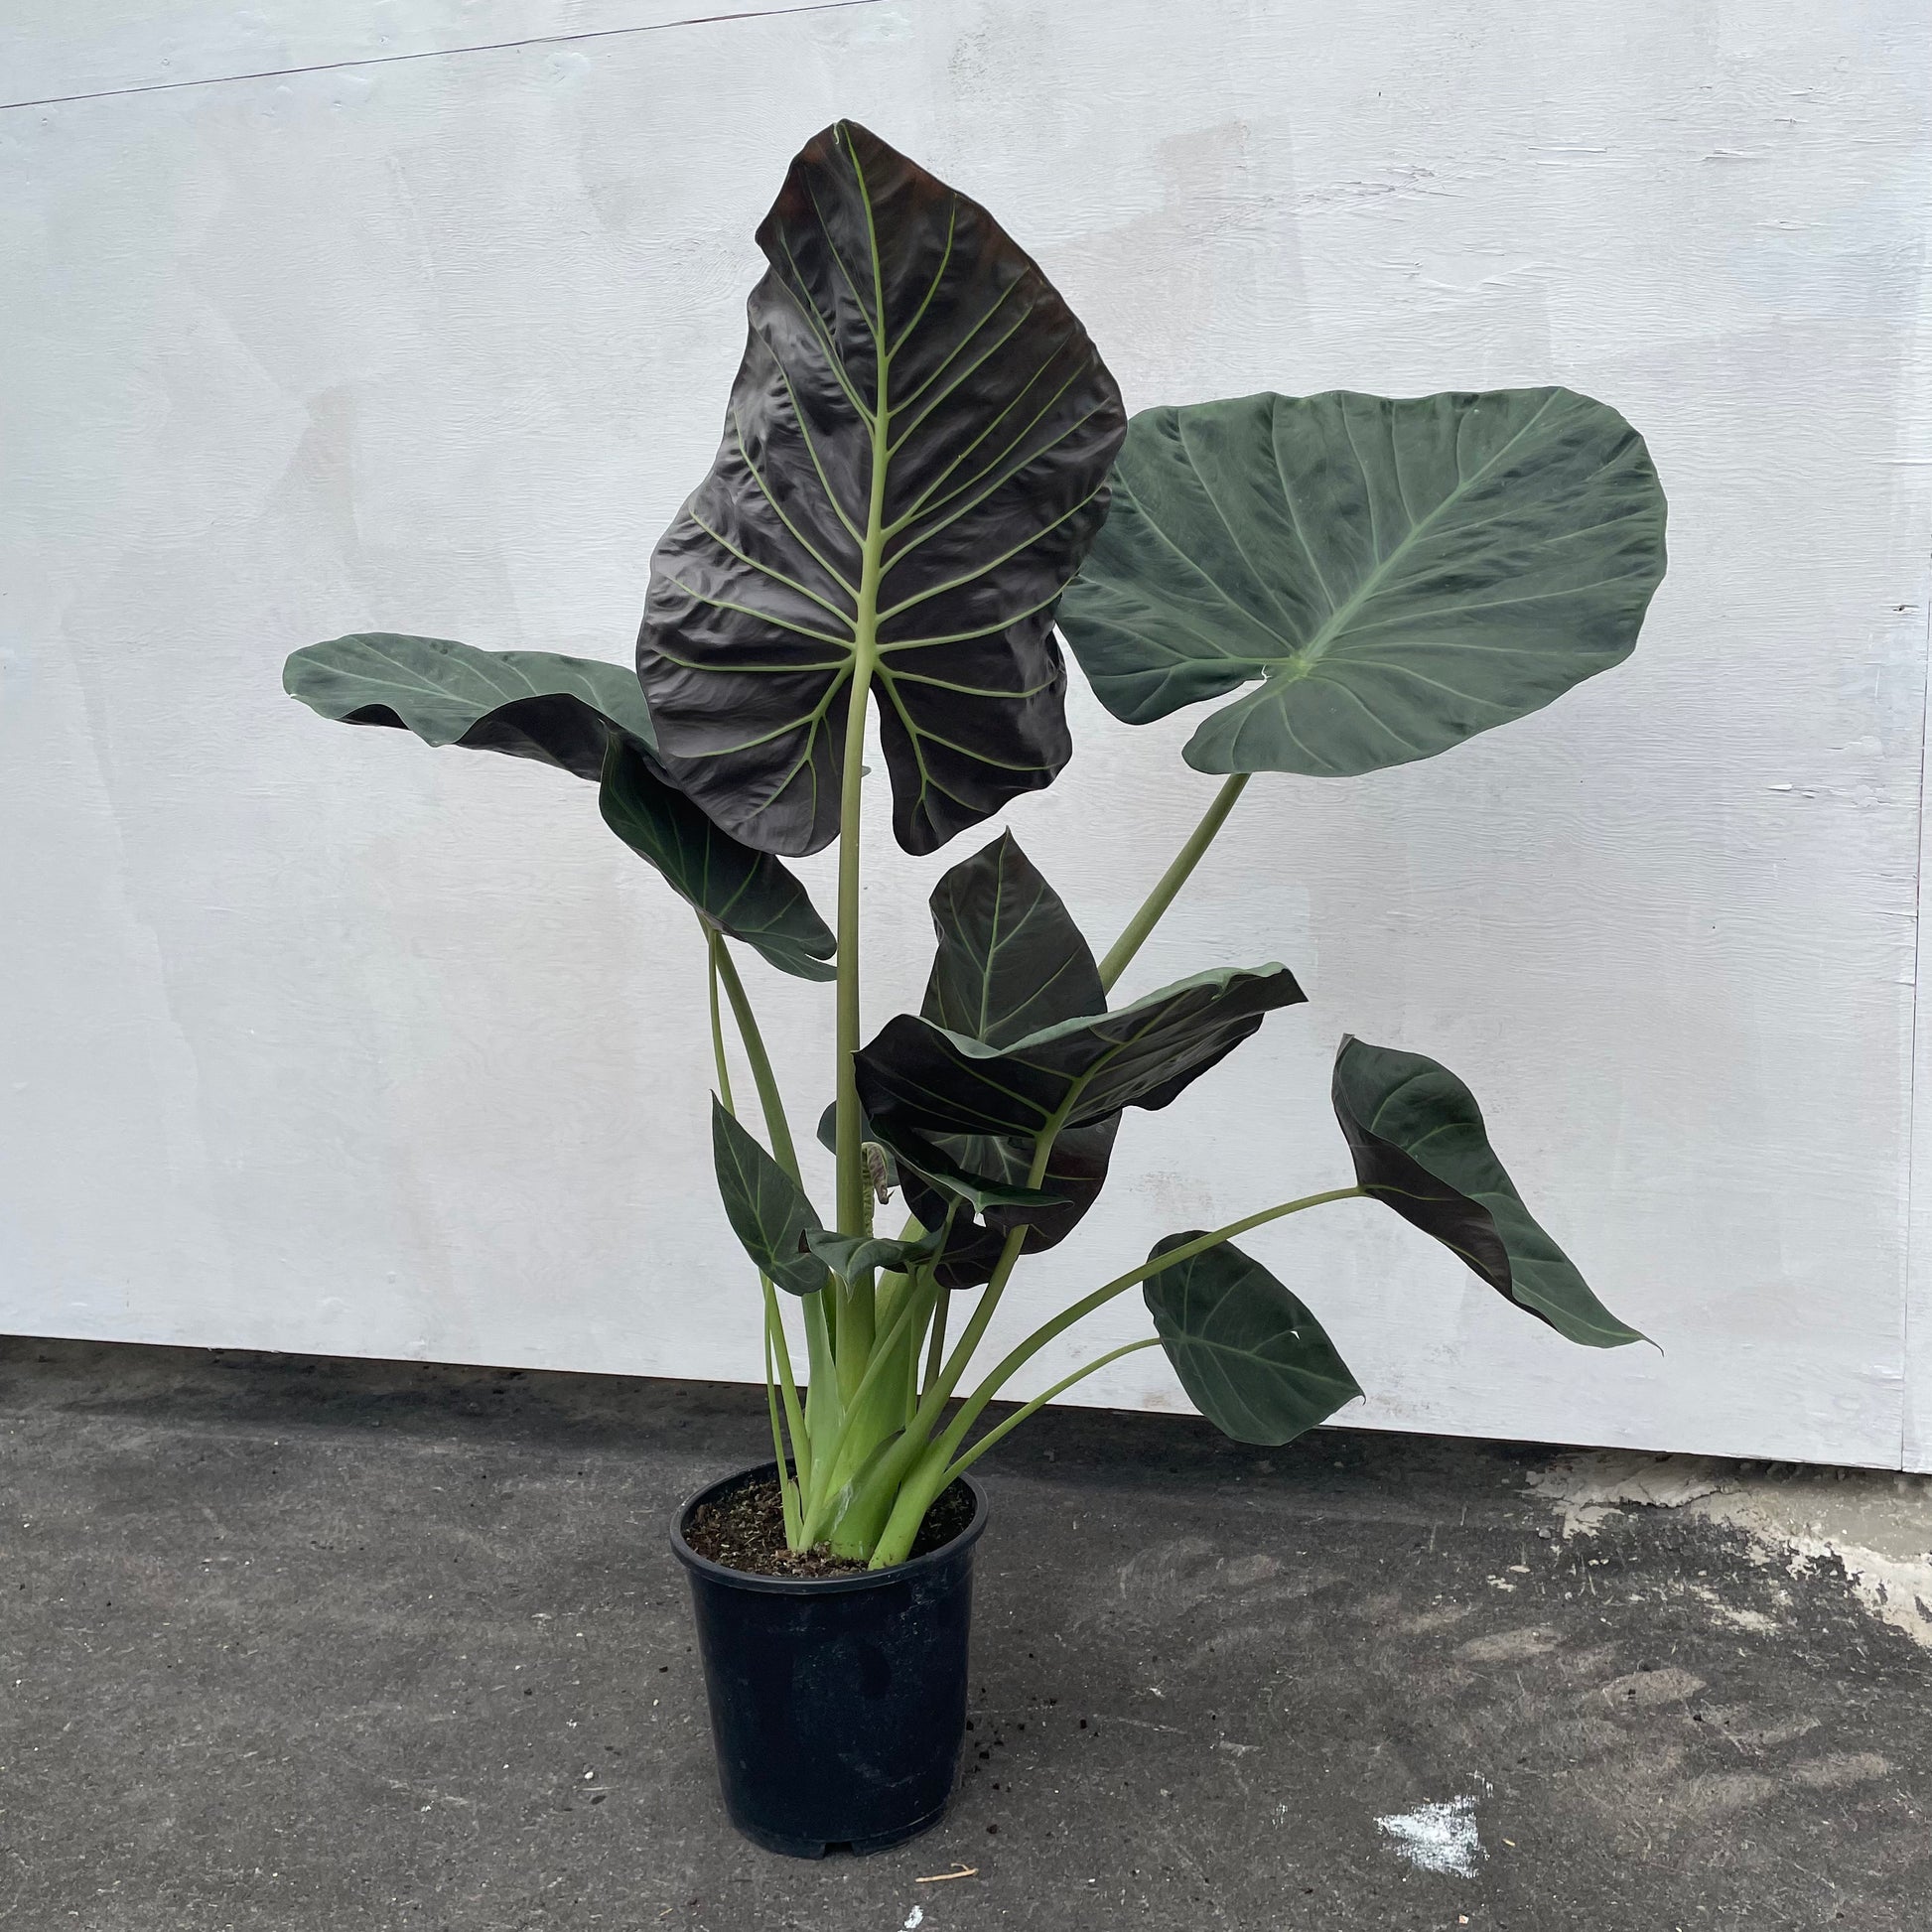 Regal Shield, Elephant Ear, Taro (Alocasia) in a 8 inch pot. Indoor plant for sale by Promise Supply for delivery and pickup in Toronto